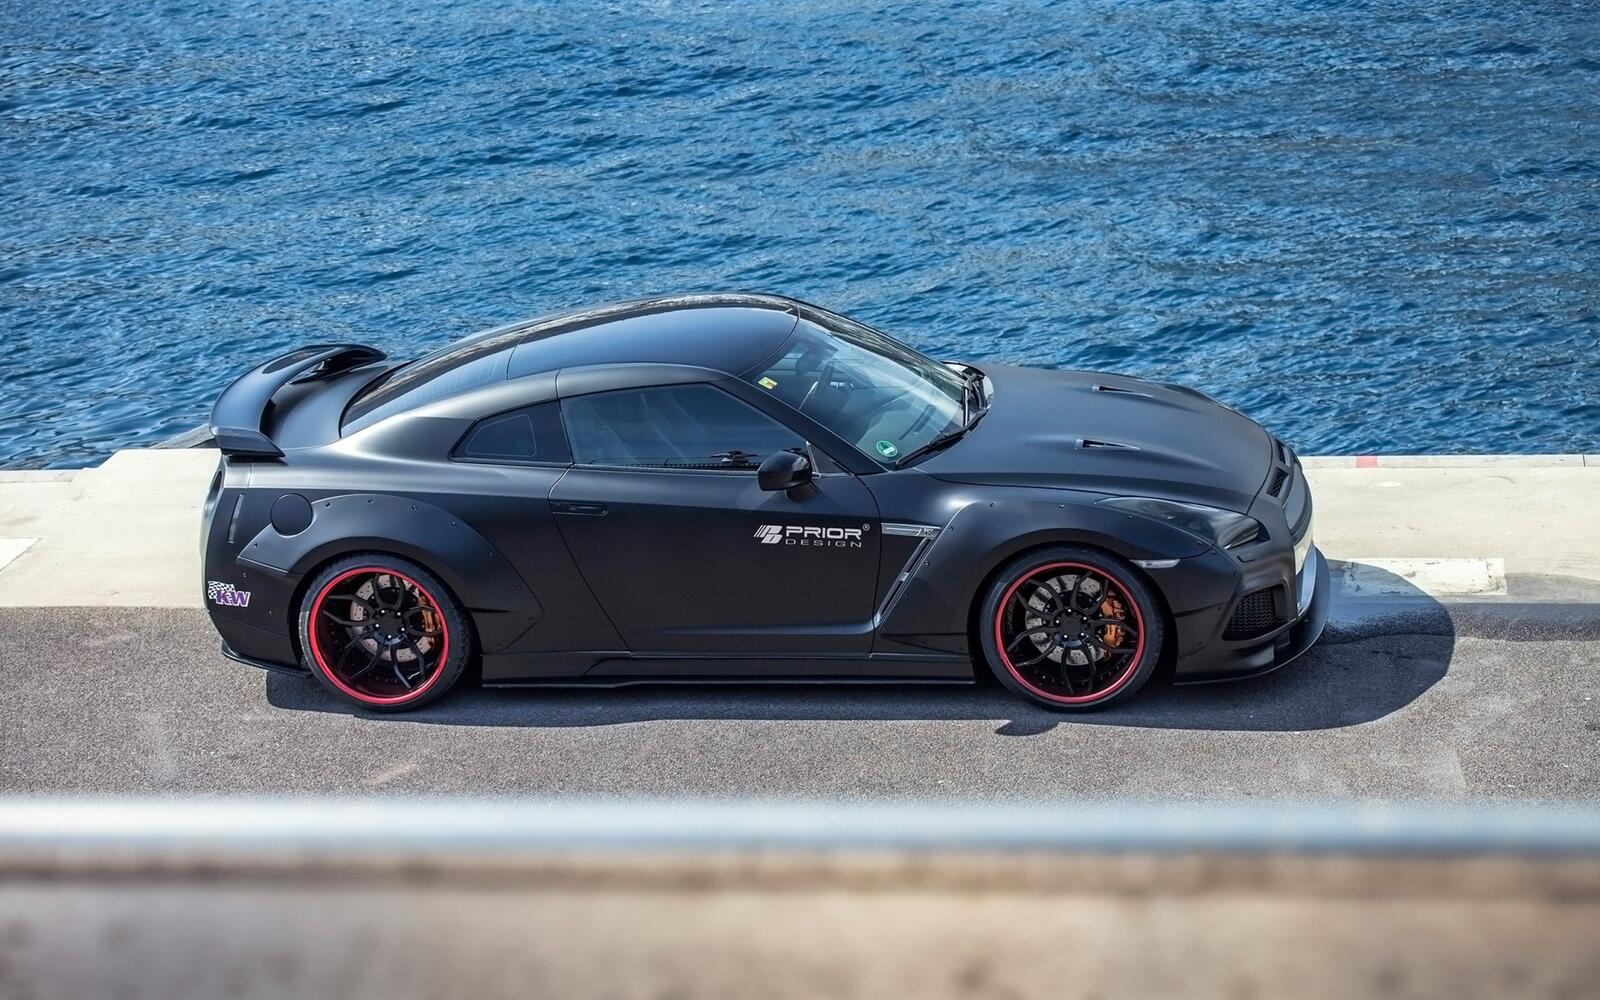 Free photo A picture of a black Nissan GT R against the sea.